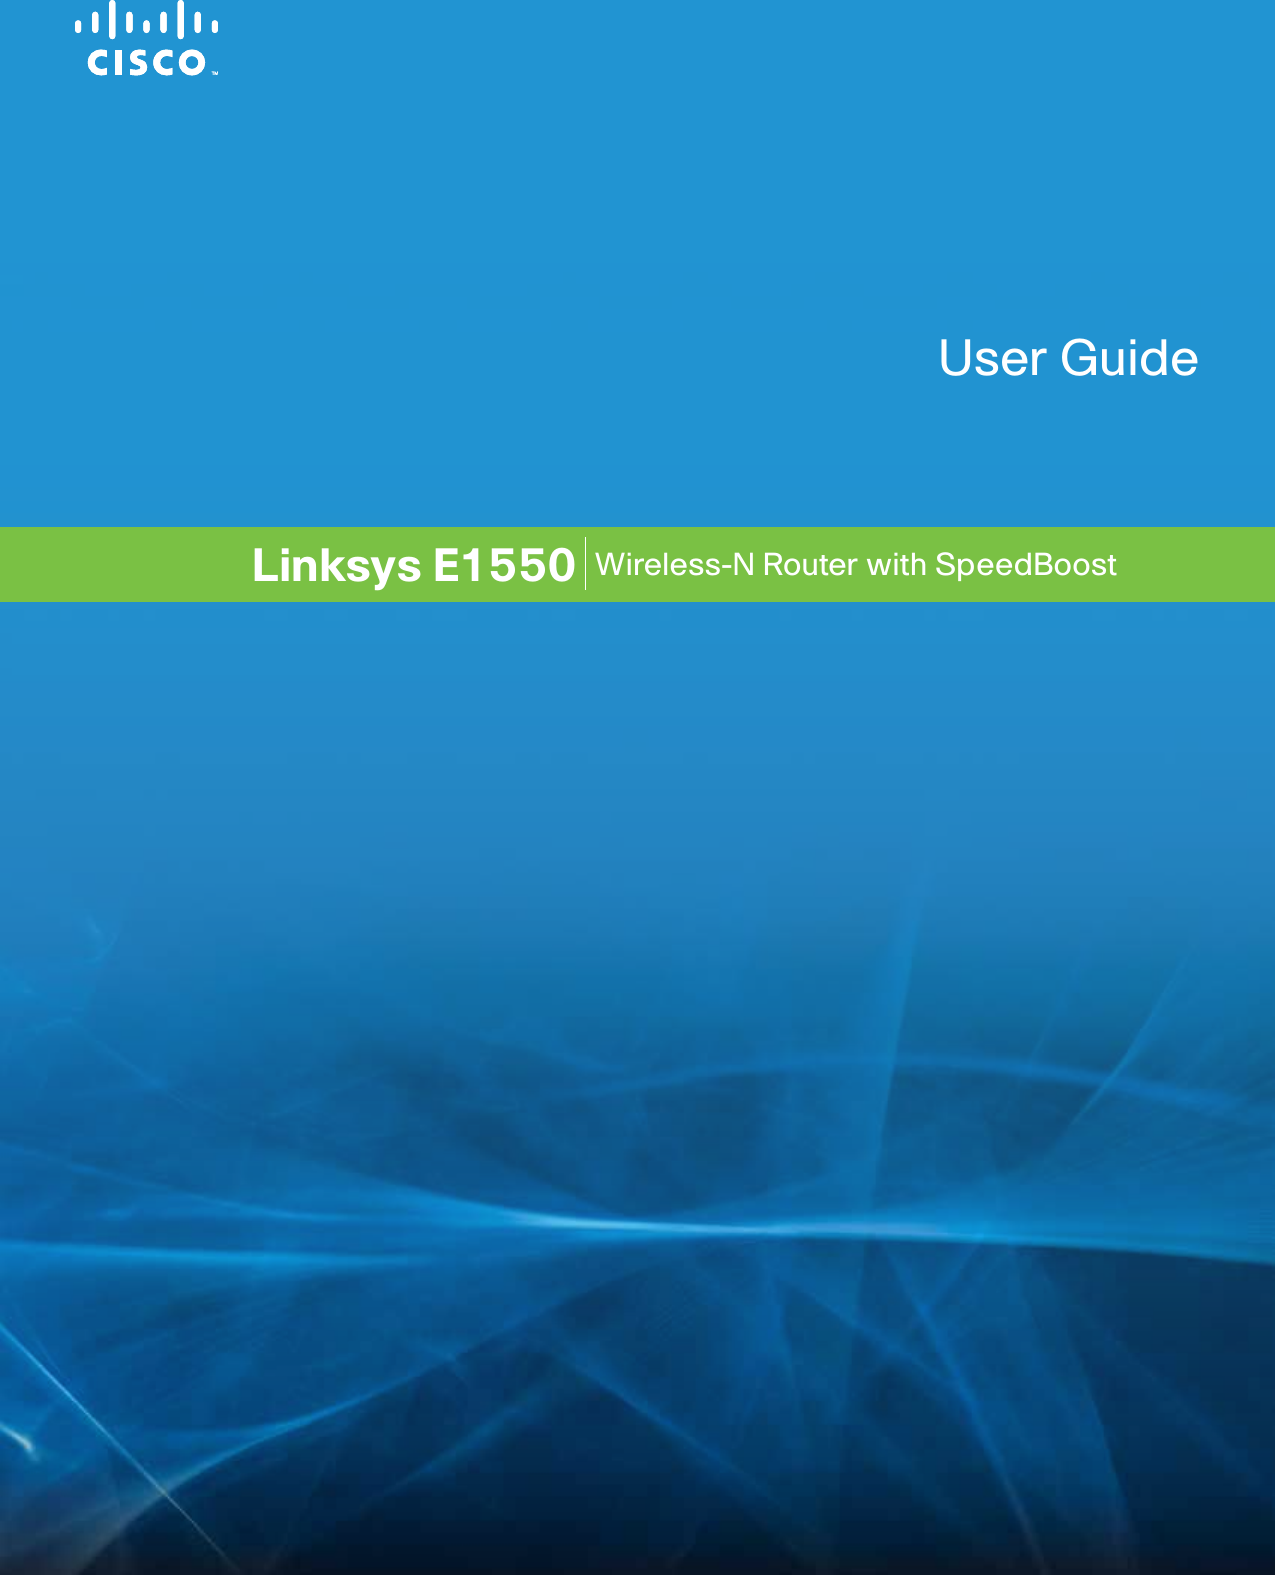 Linksys E1550 Wireless-N Router with SpeedBoost User Guide